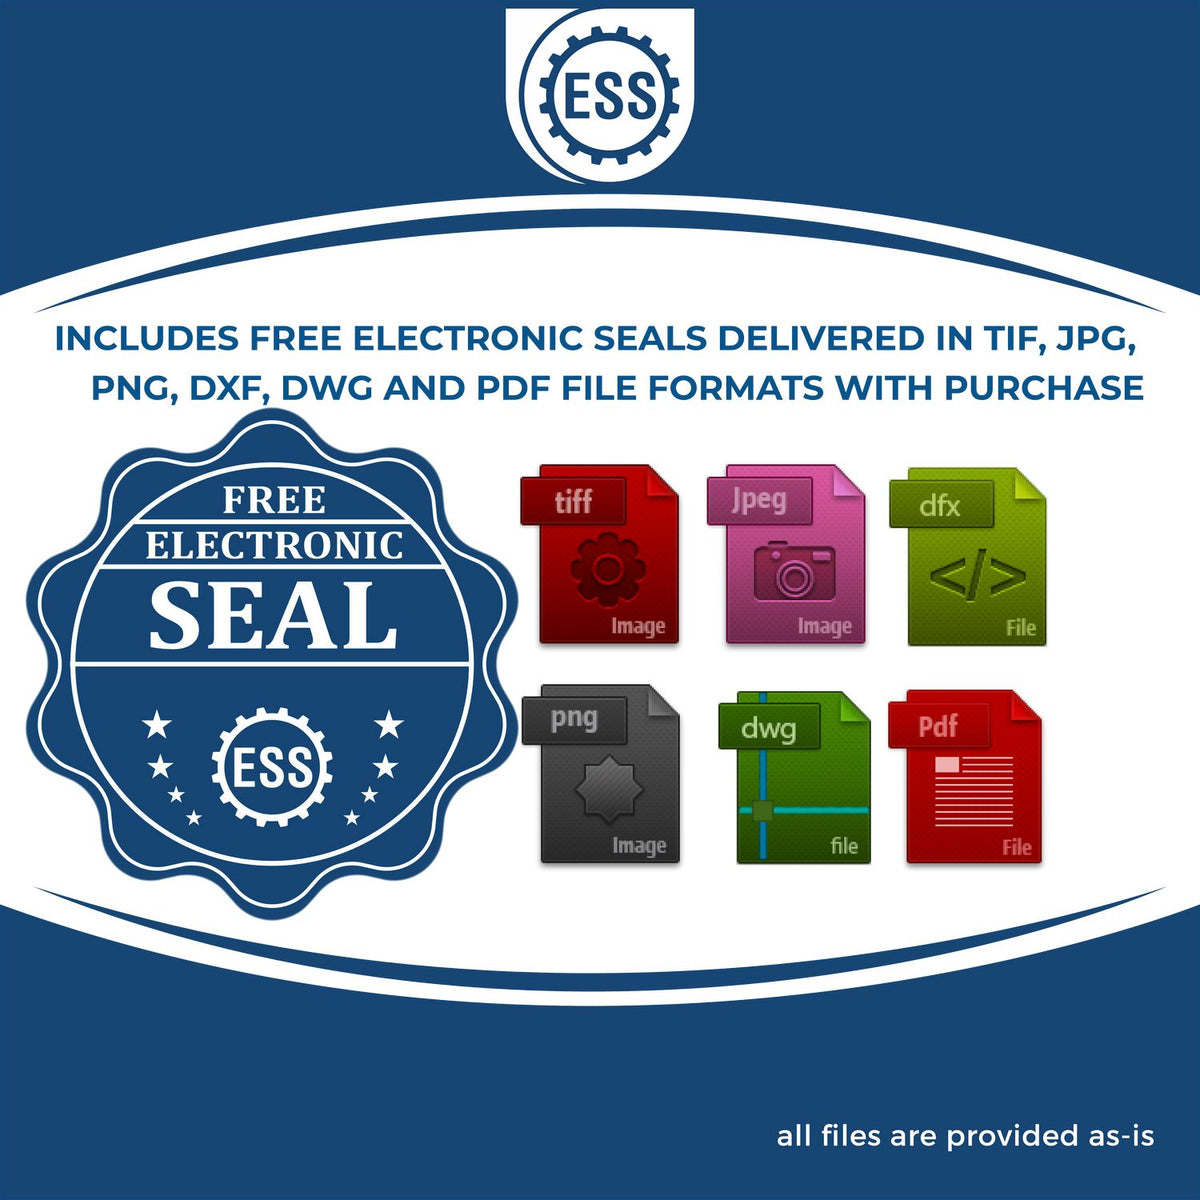 An infographic for the free electronic seal for the Handheld Kansas Professional Geologist Embosser illustrating the different file type icons such as DXF, DWG, TIF, JPG and PNG.